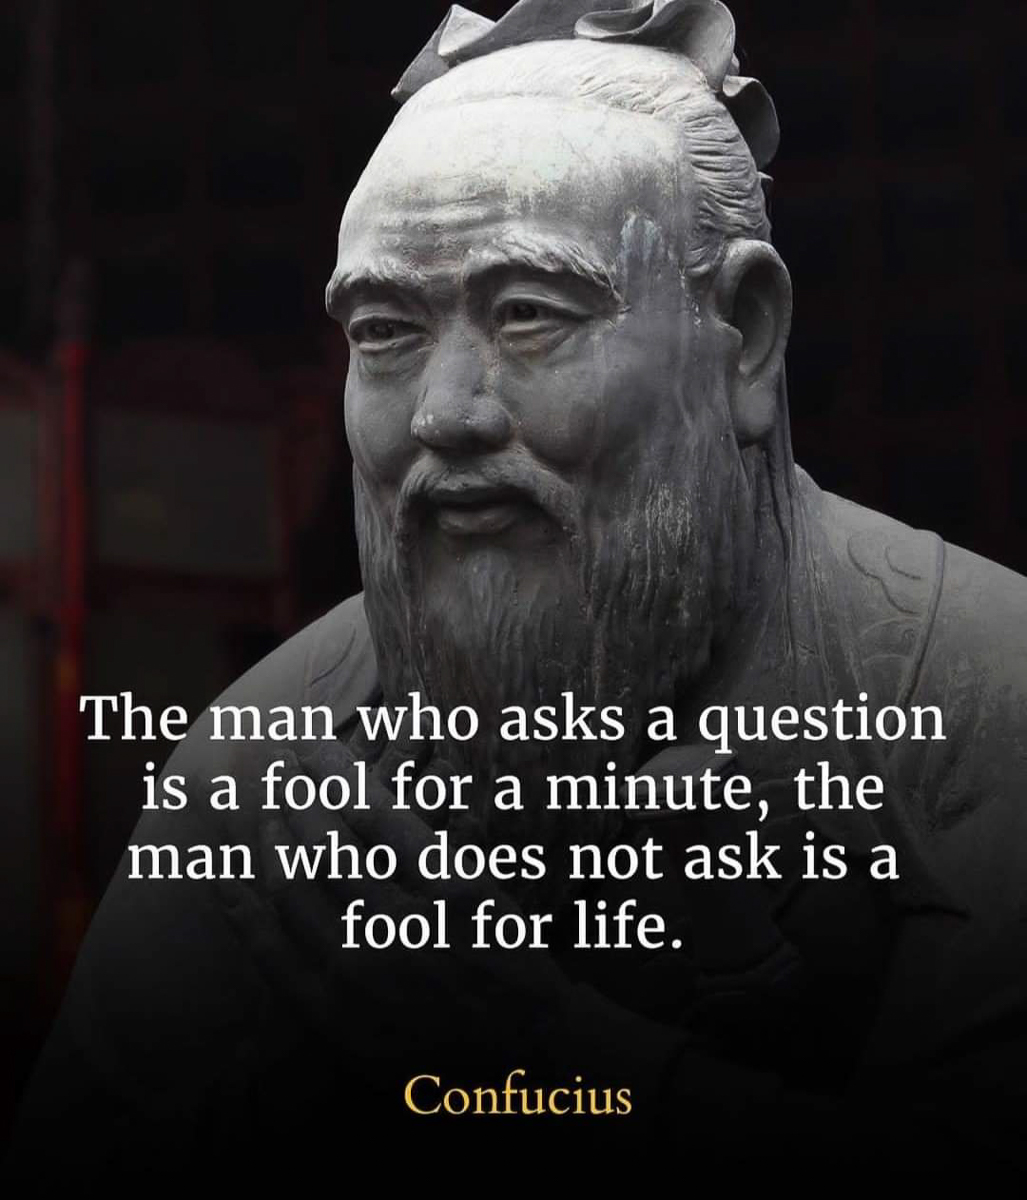 man who asks a question is a fool for a minute not to ask is fool for life  ~~  